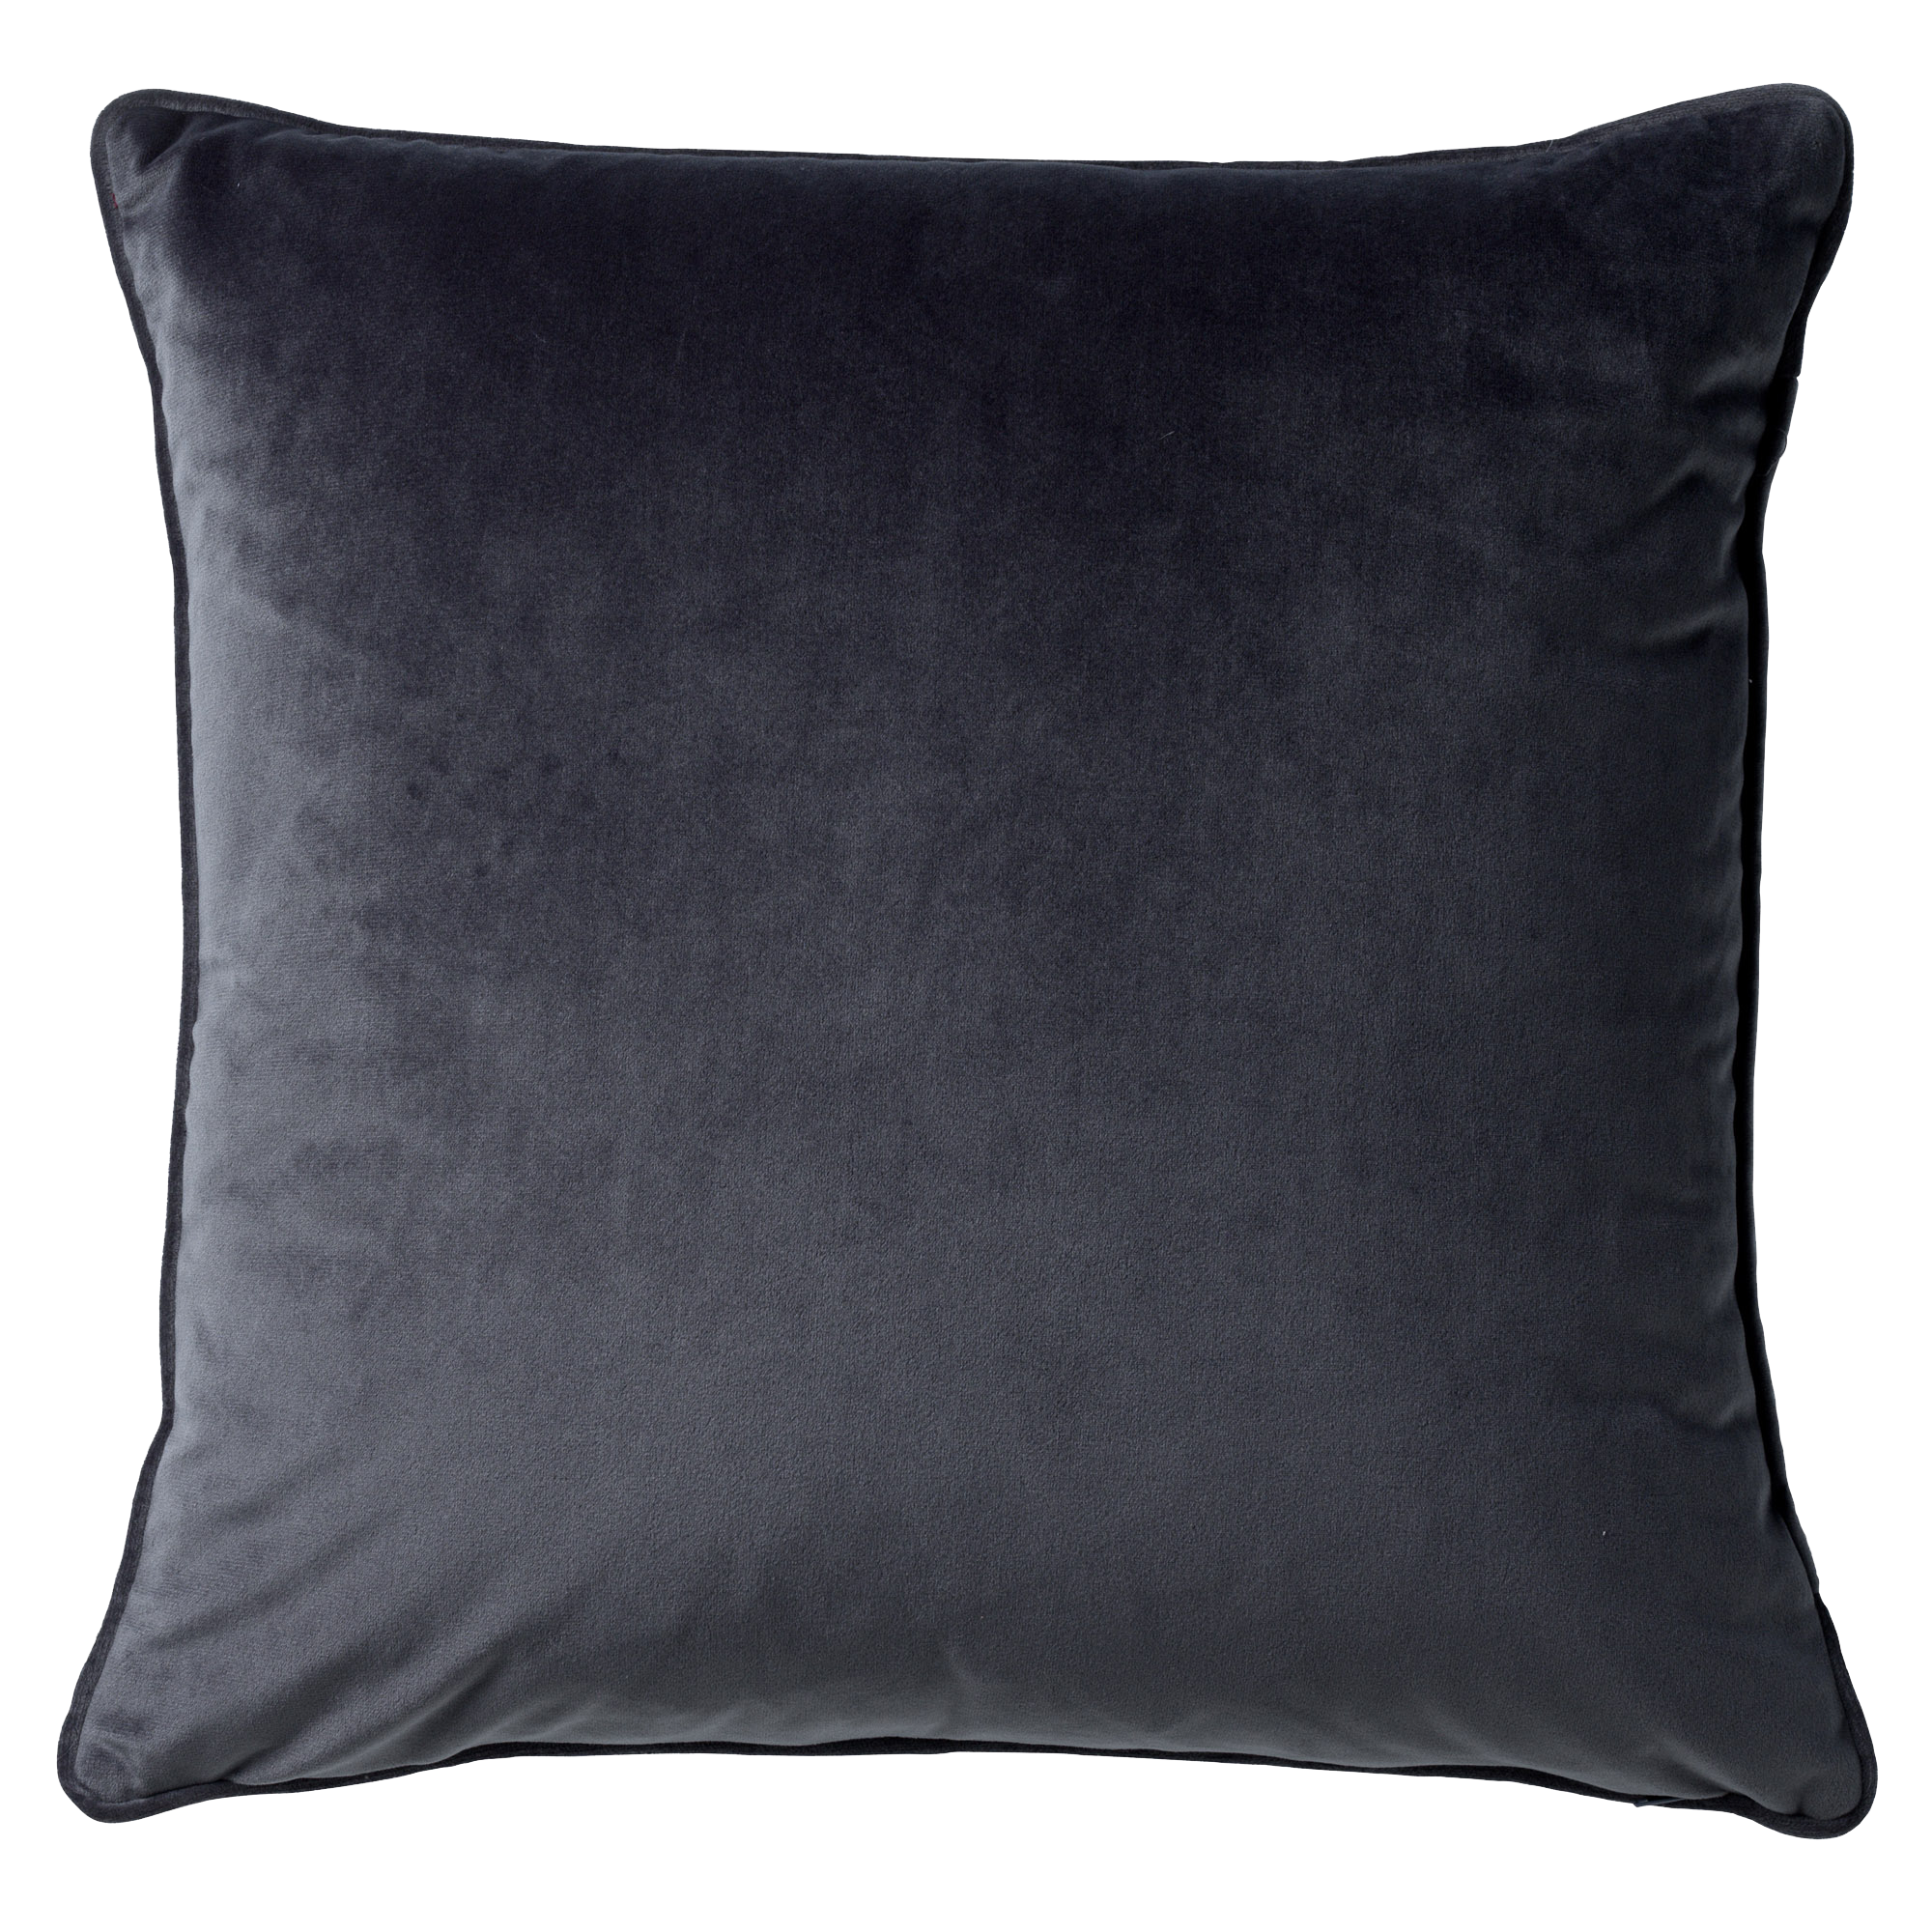 FINNA - Kussenhoes 100% gerecycled polyester - Eco Line collectie 45x45 cm - Charcoal Gray - antraciet